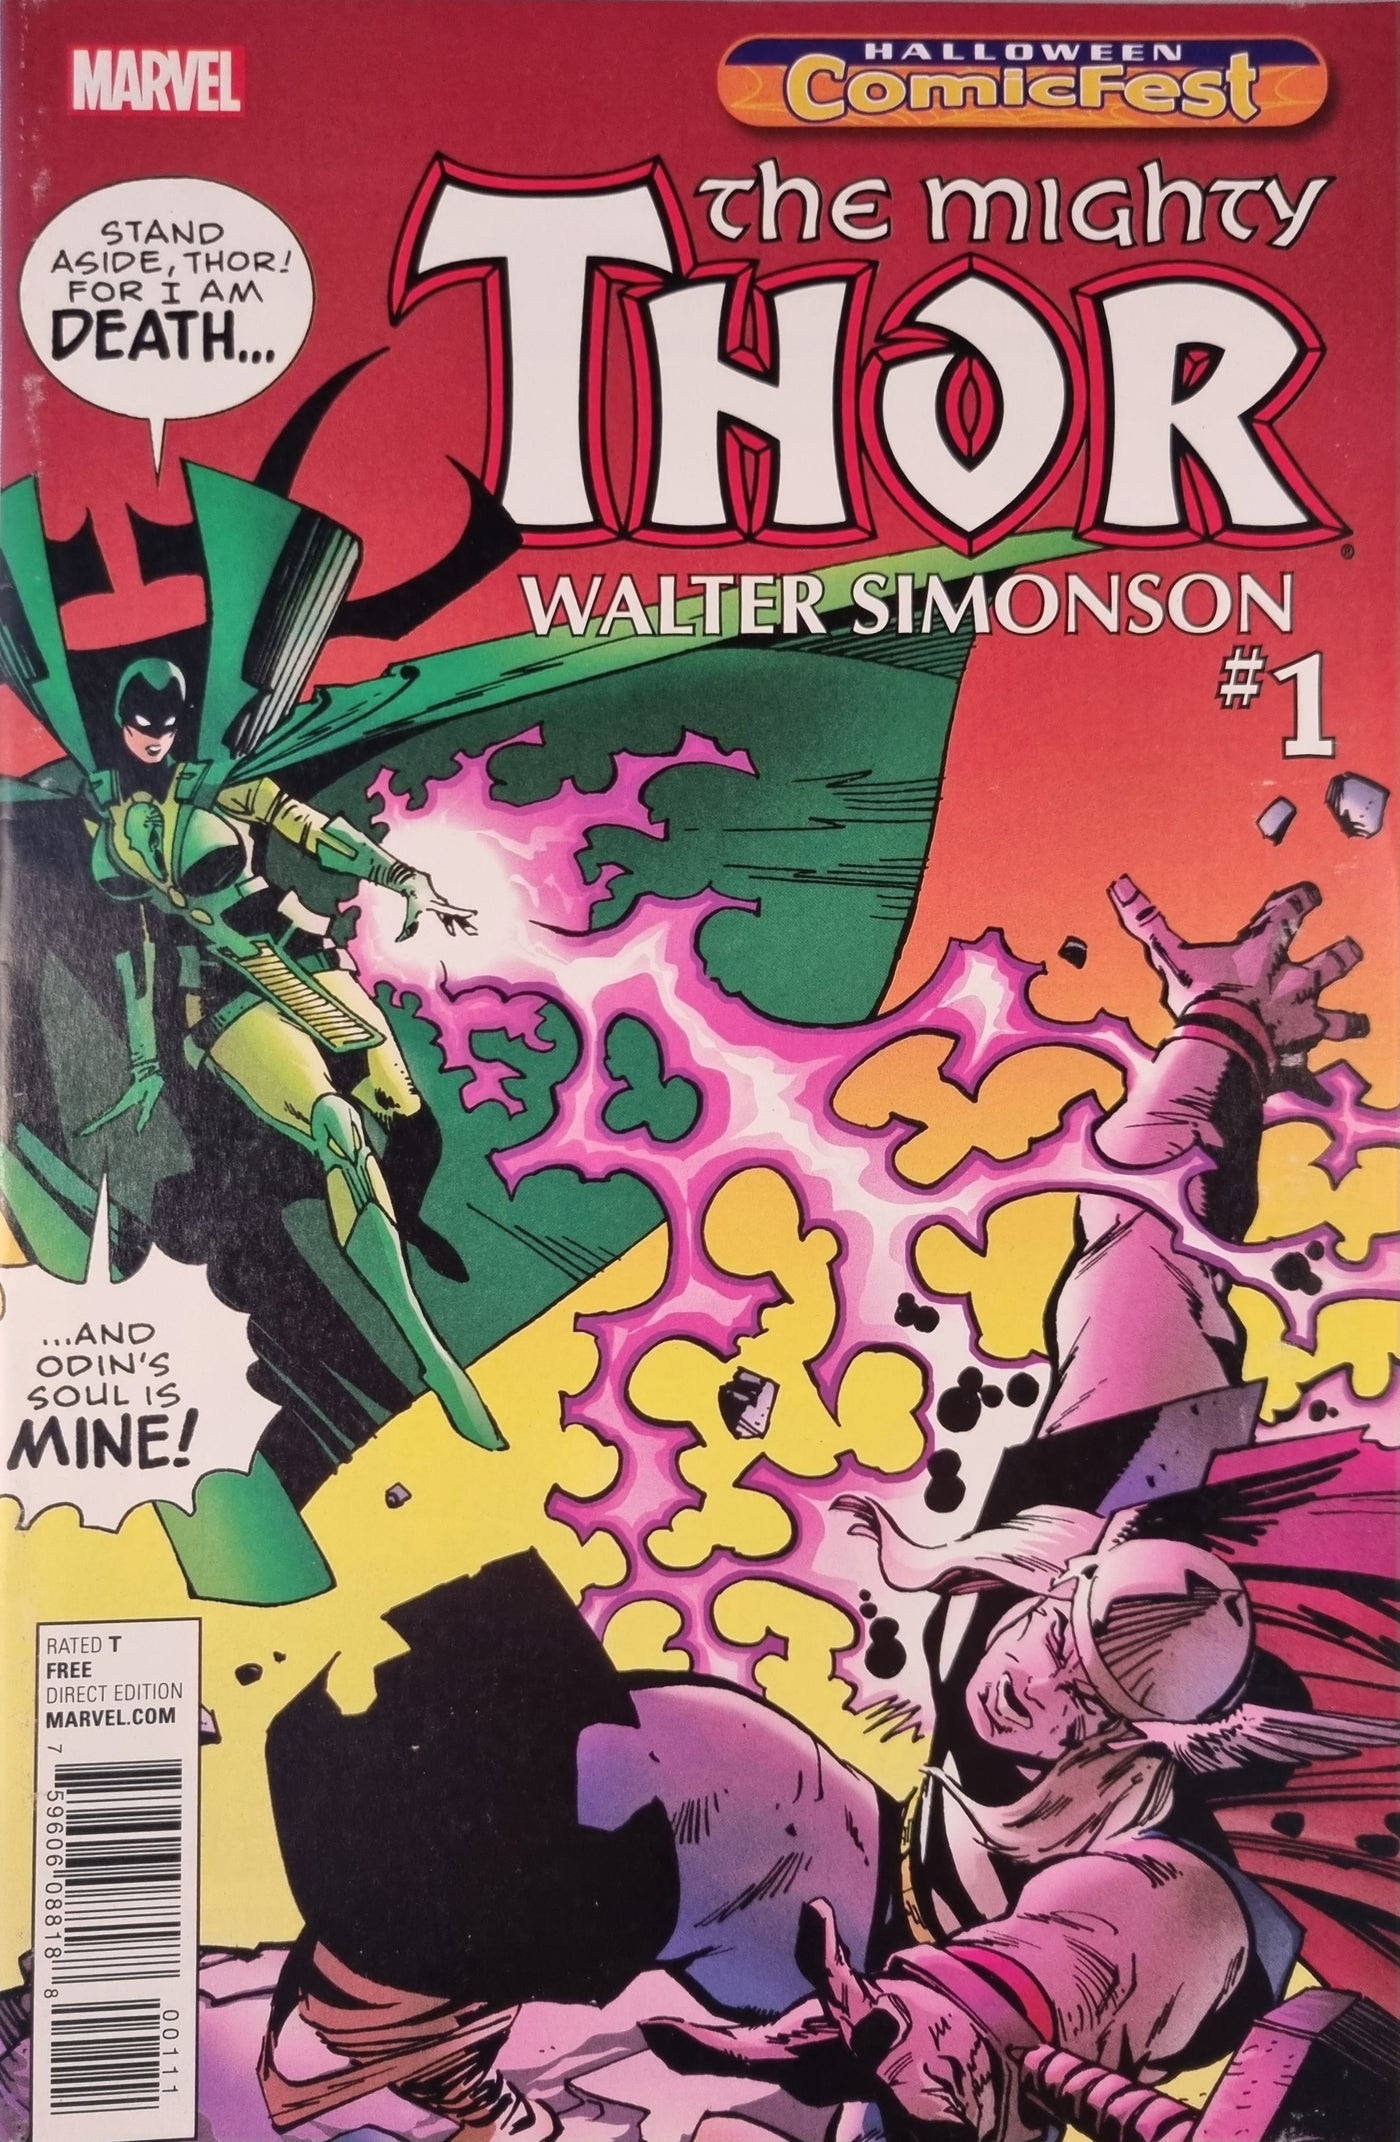 Halloween Comicfest The Mighty Thor #1